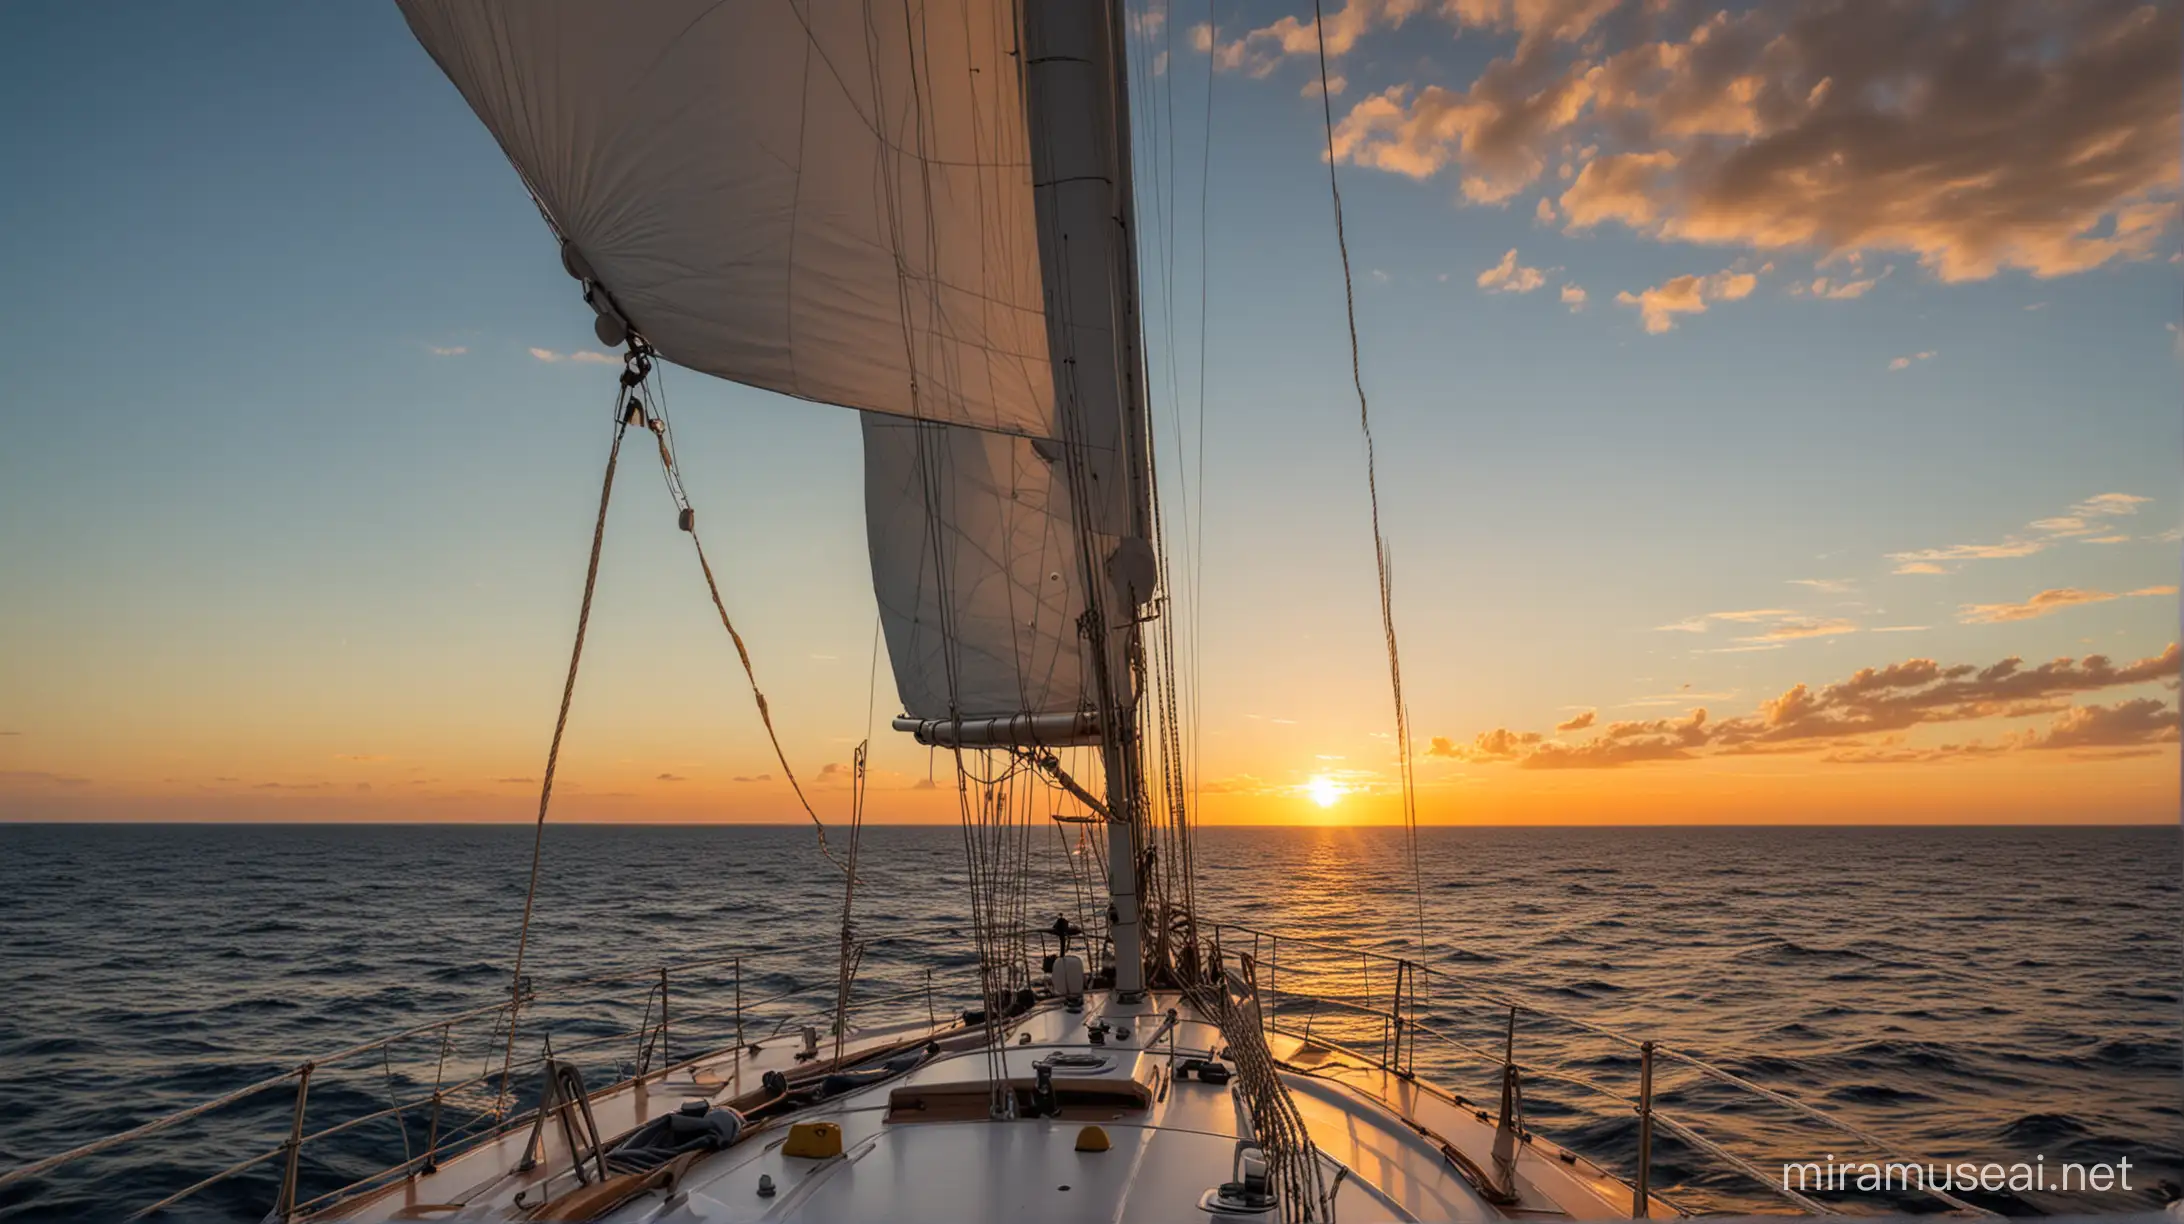 sunset sailing on the gulf of mexico, hi resolution, nikon, close up, 
 on deck view

